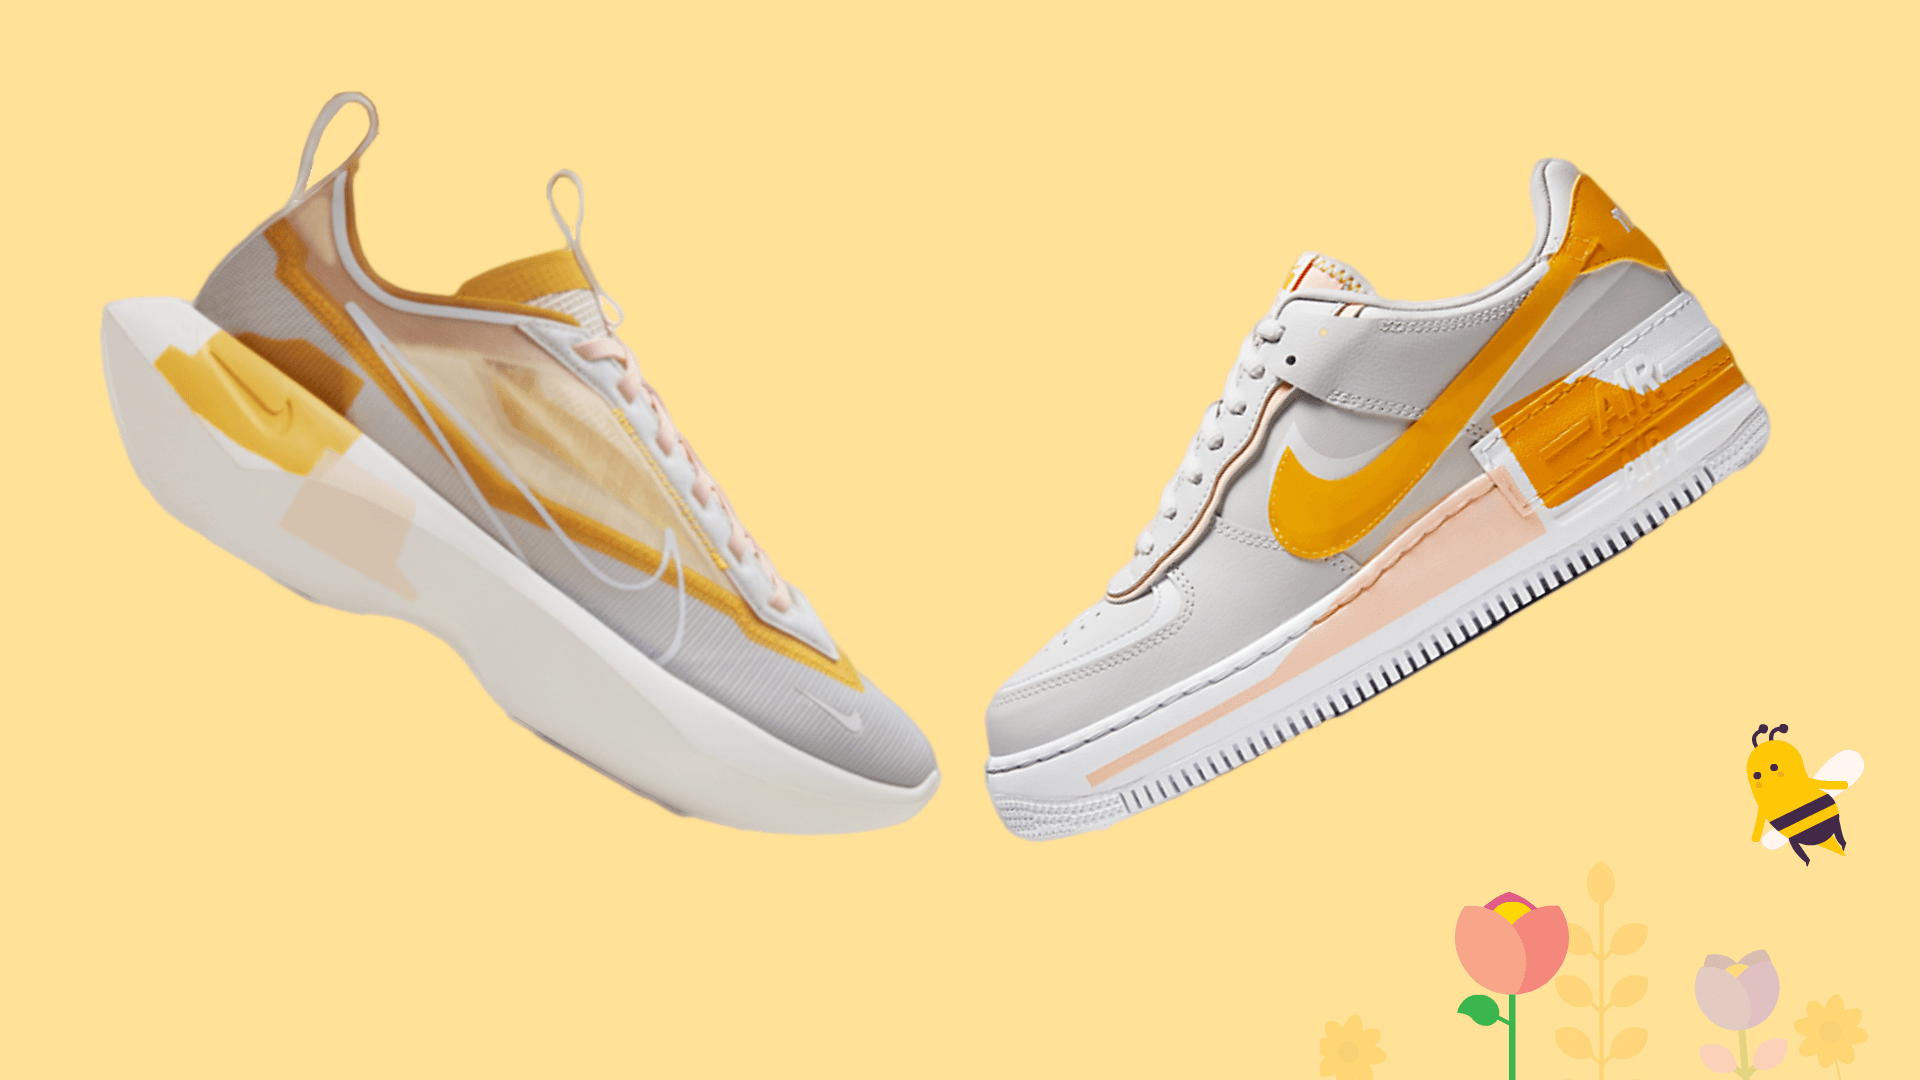 2 Sneakers, 1 Colorway - the Nike Pollen Rise models